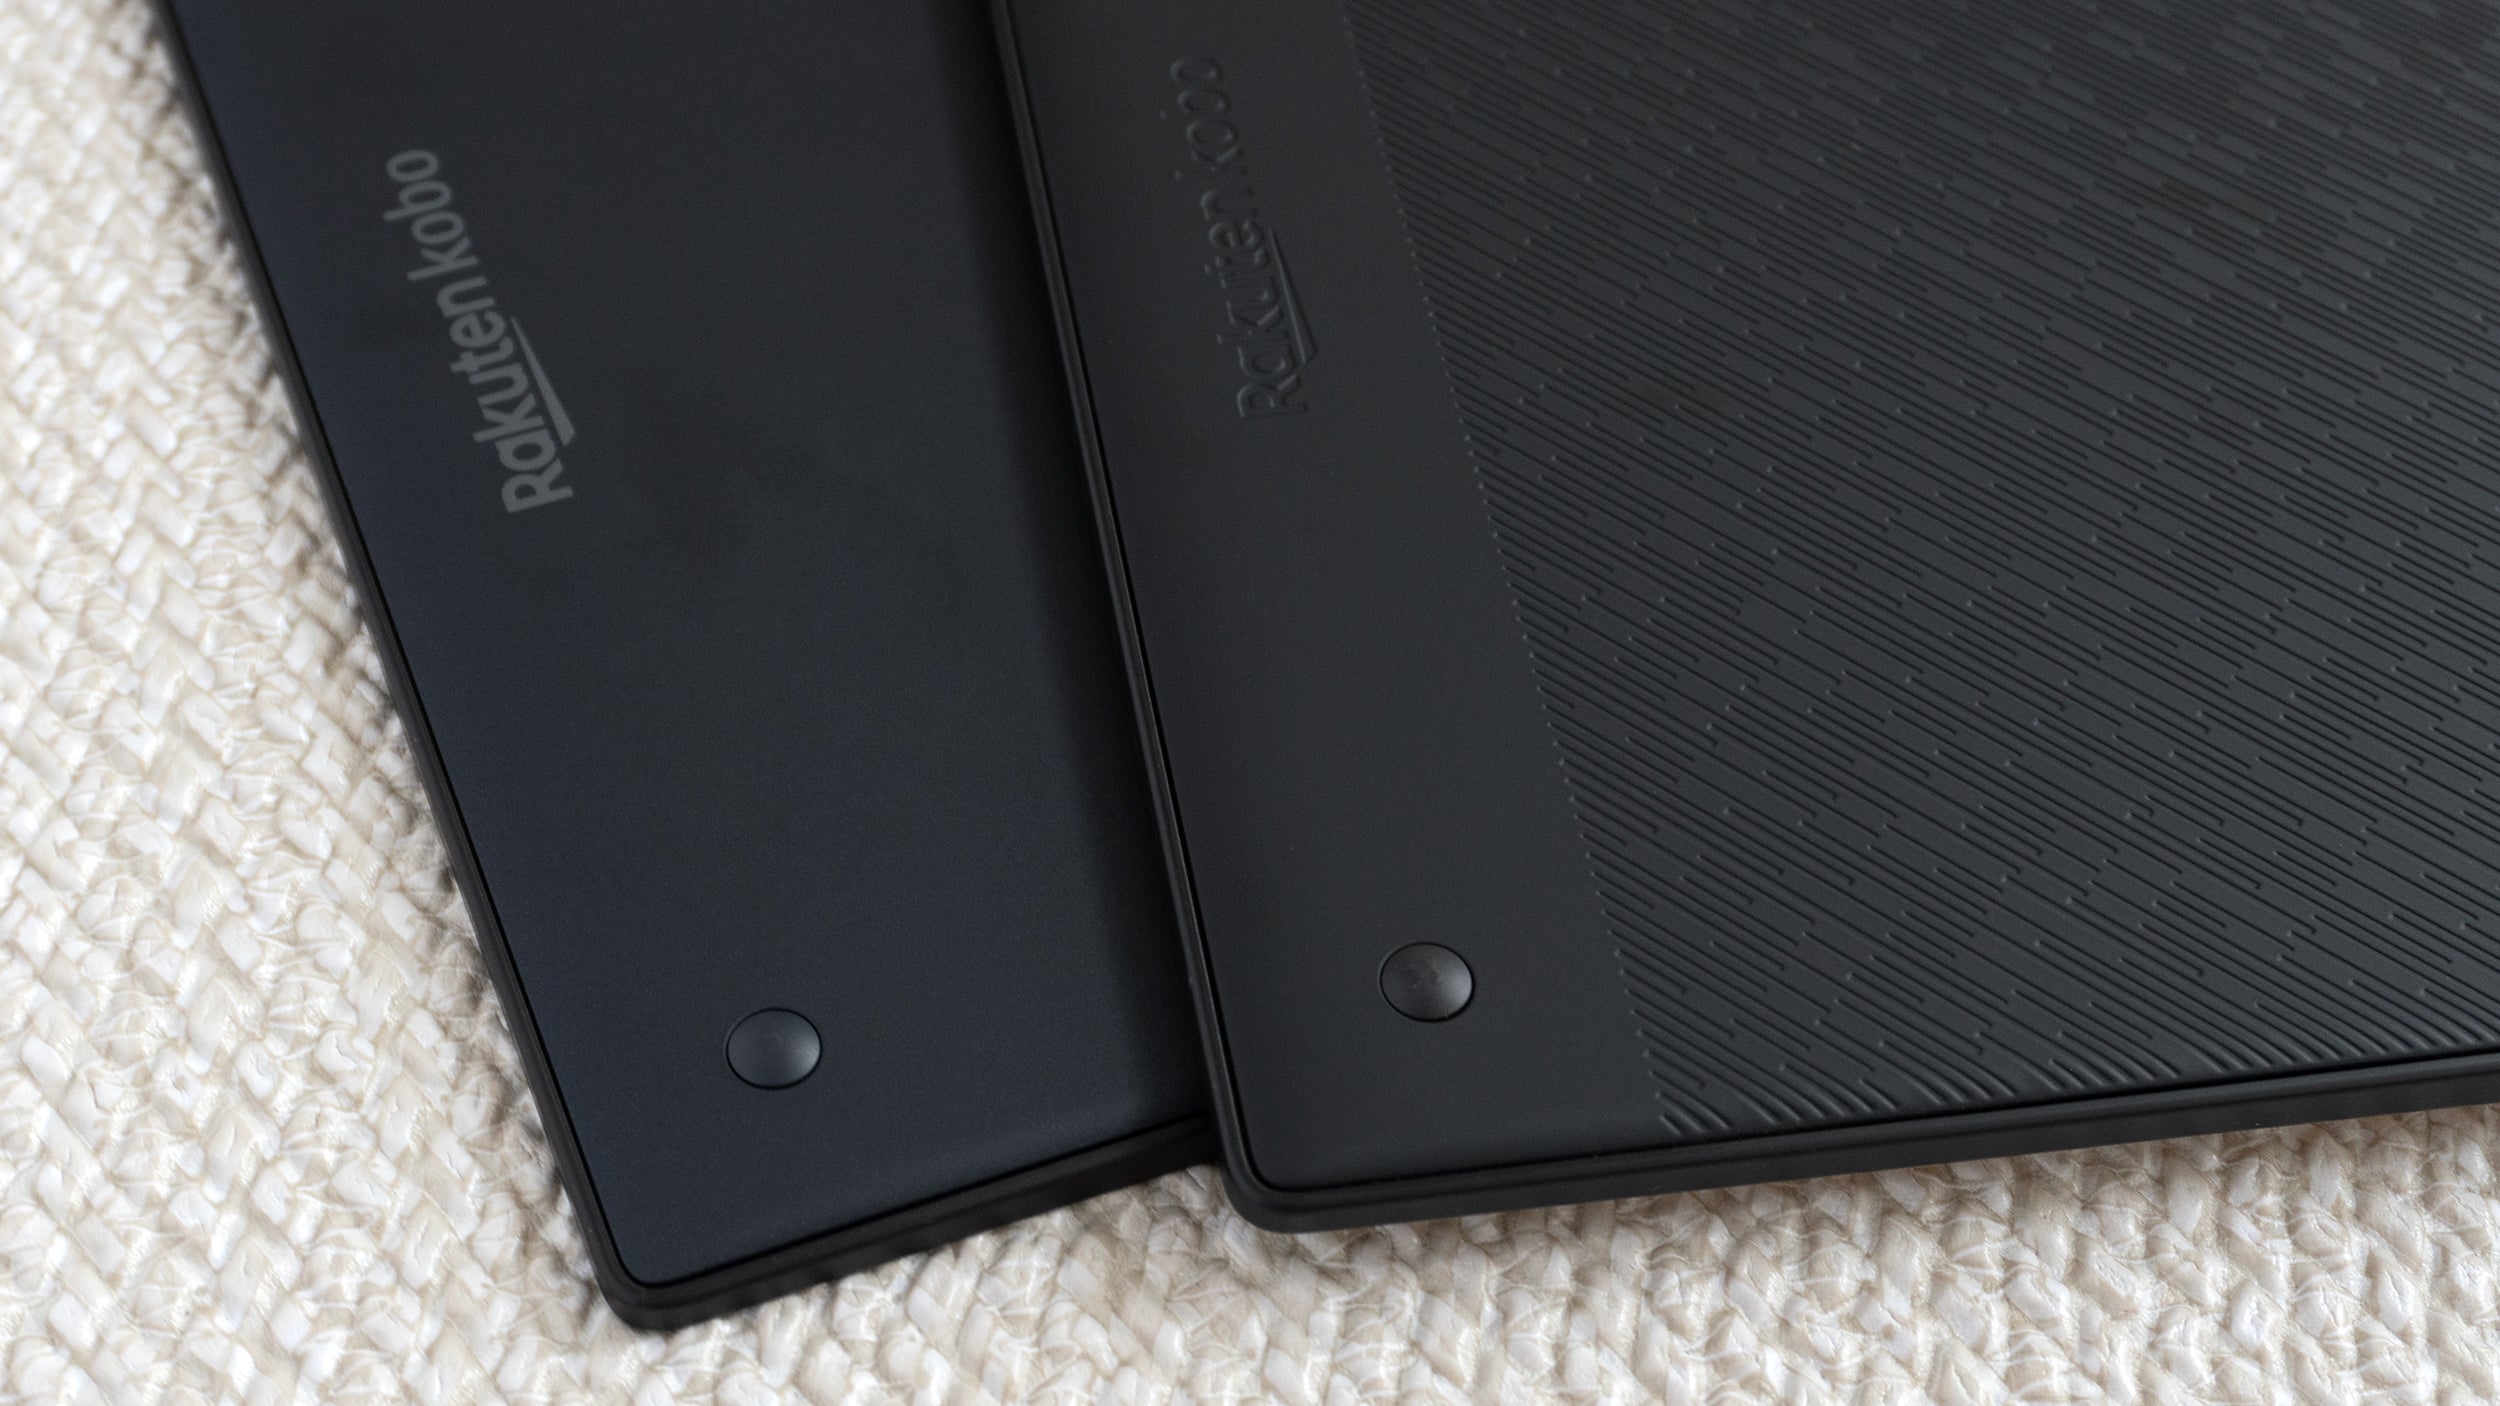 The rubberised back panel on the Kobo Elipsa 2E (front) features added texture making the tablet easier to grip. (Photo: Andrew Liszewski | Gizmodo)